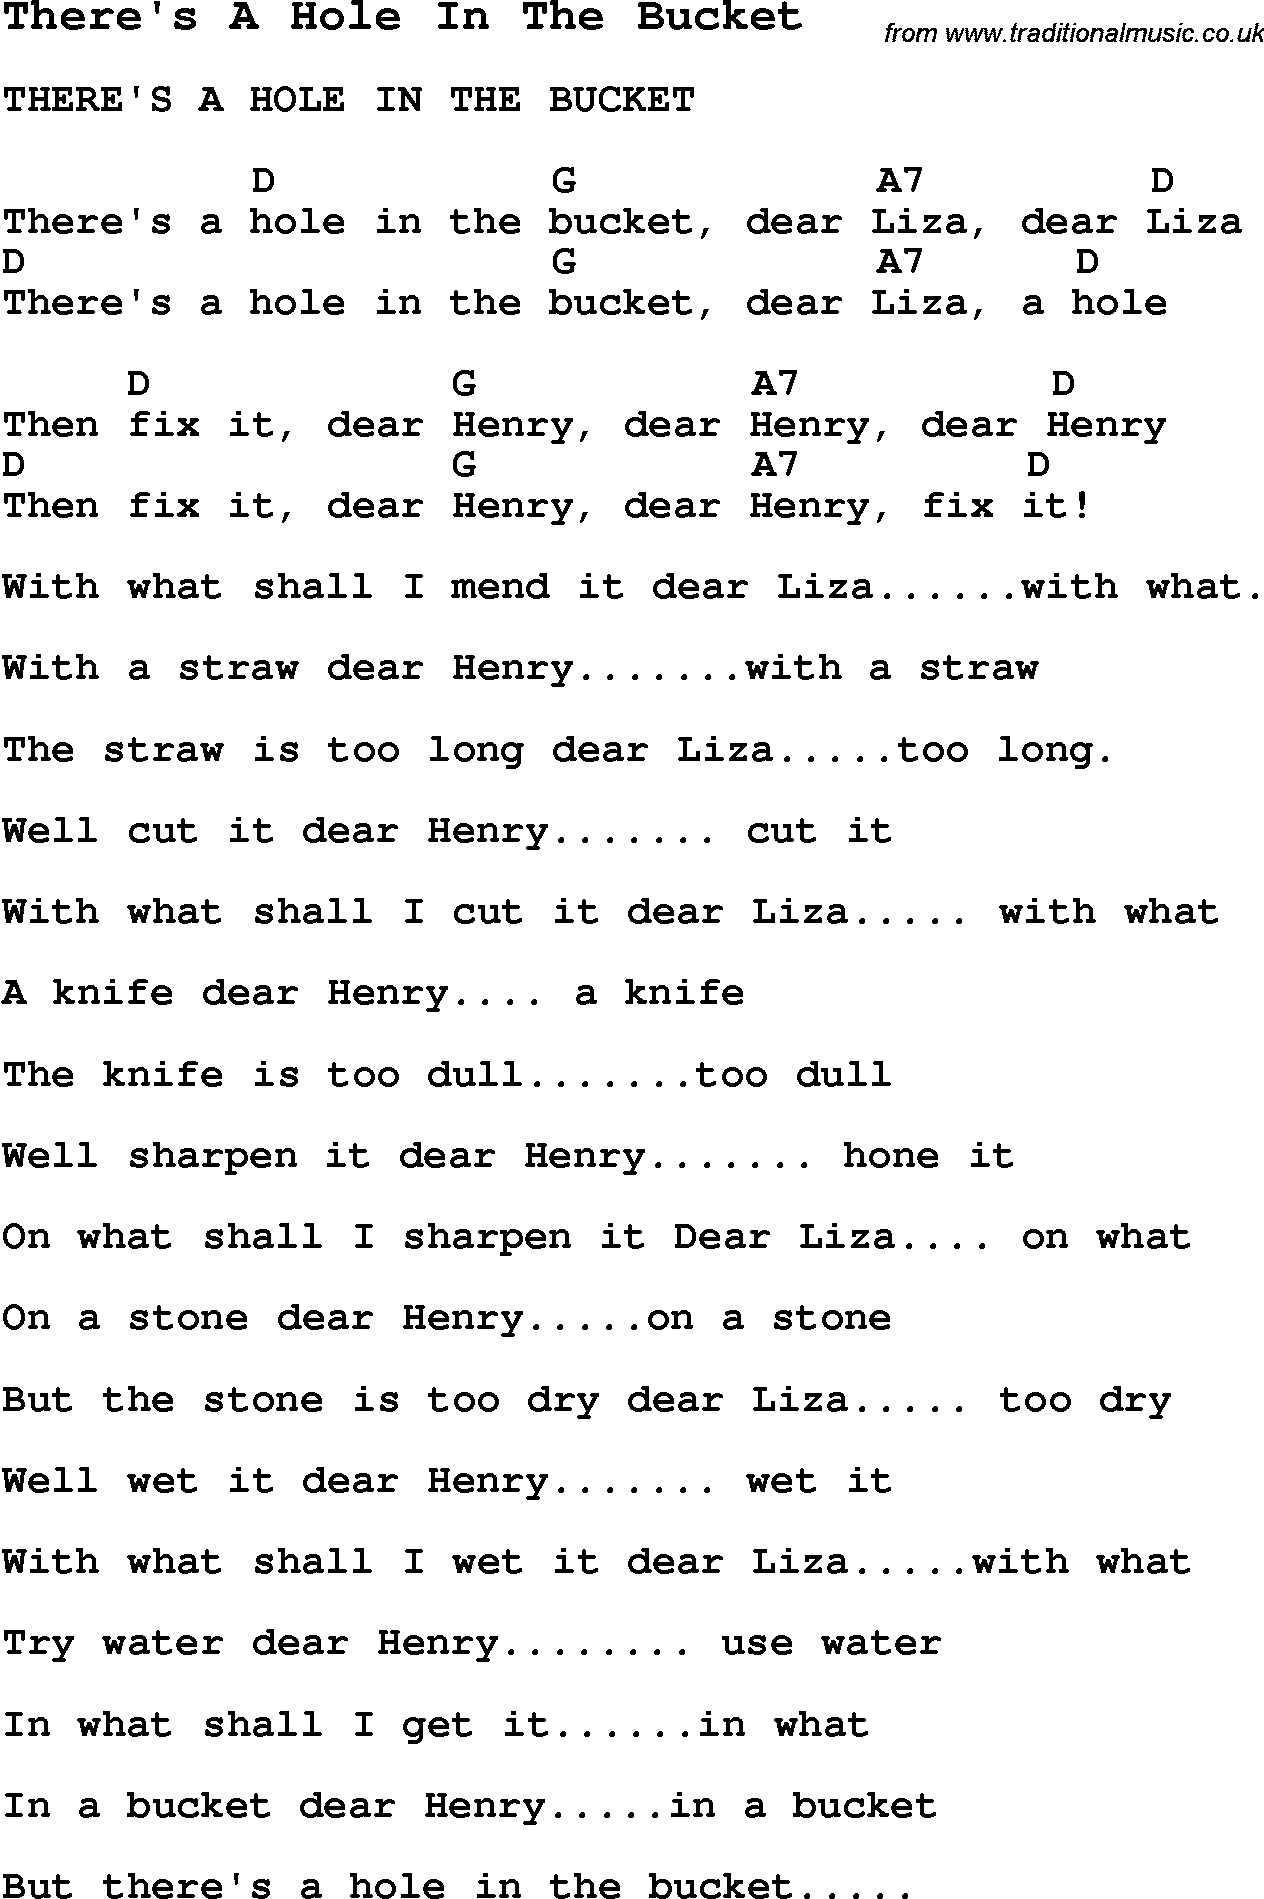 Summer-Camp Song, There's A Hole In The Bucket, with lyrics and chords for Ukulele, Guitar Banjo etc.